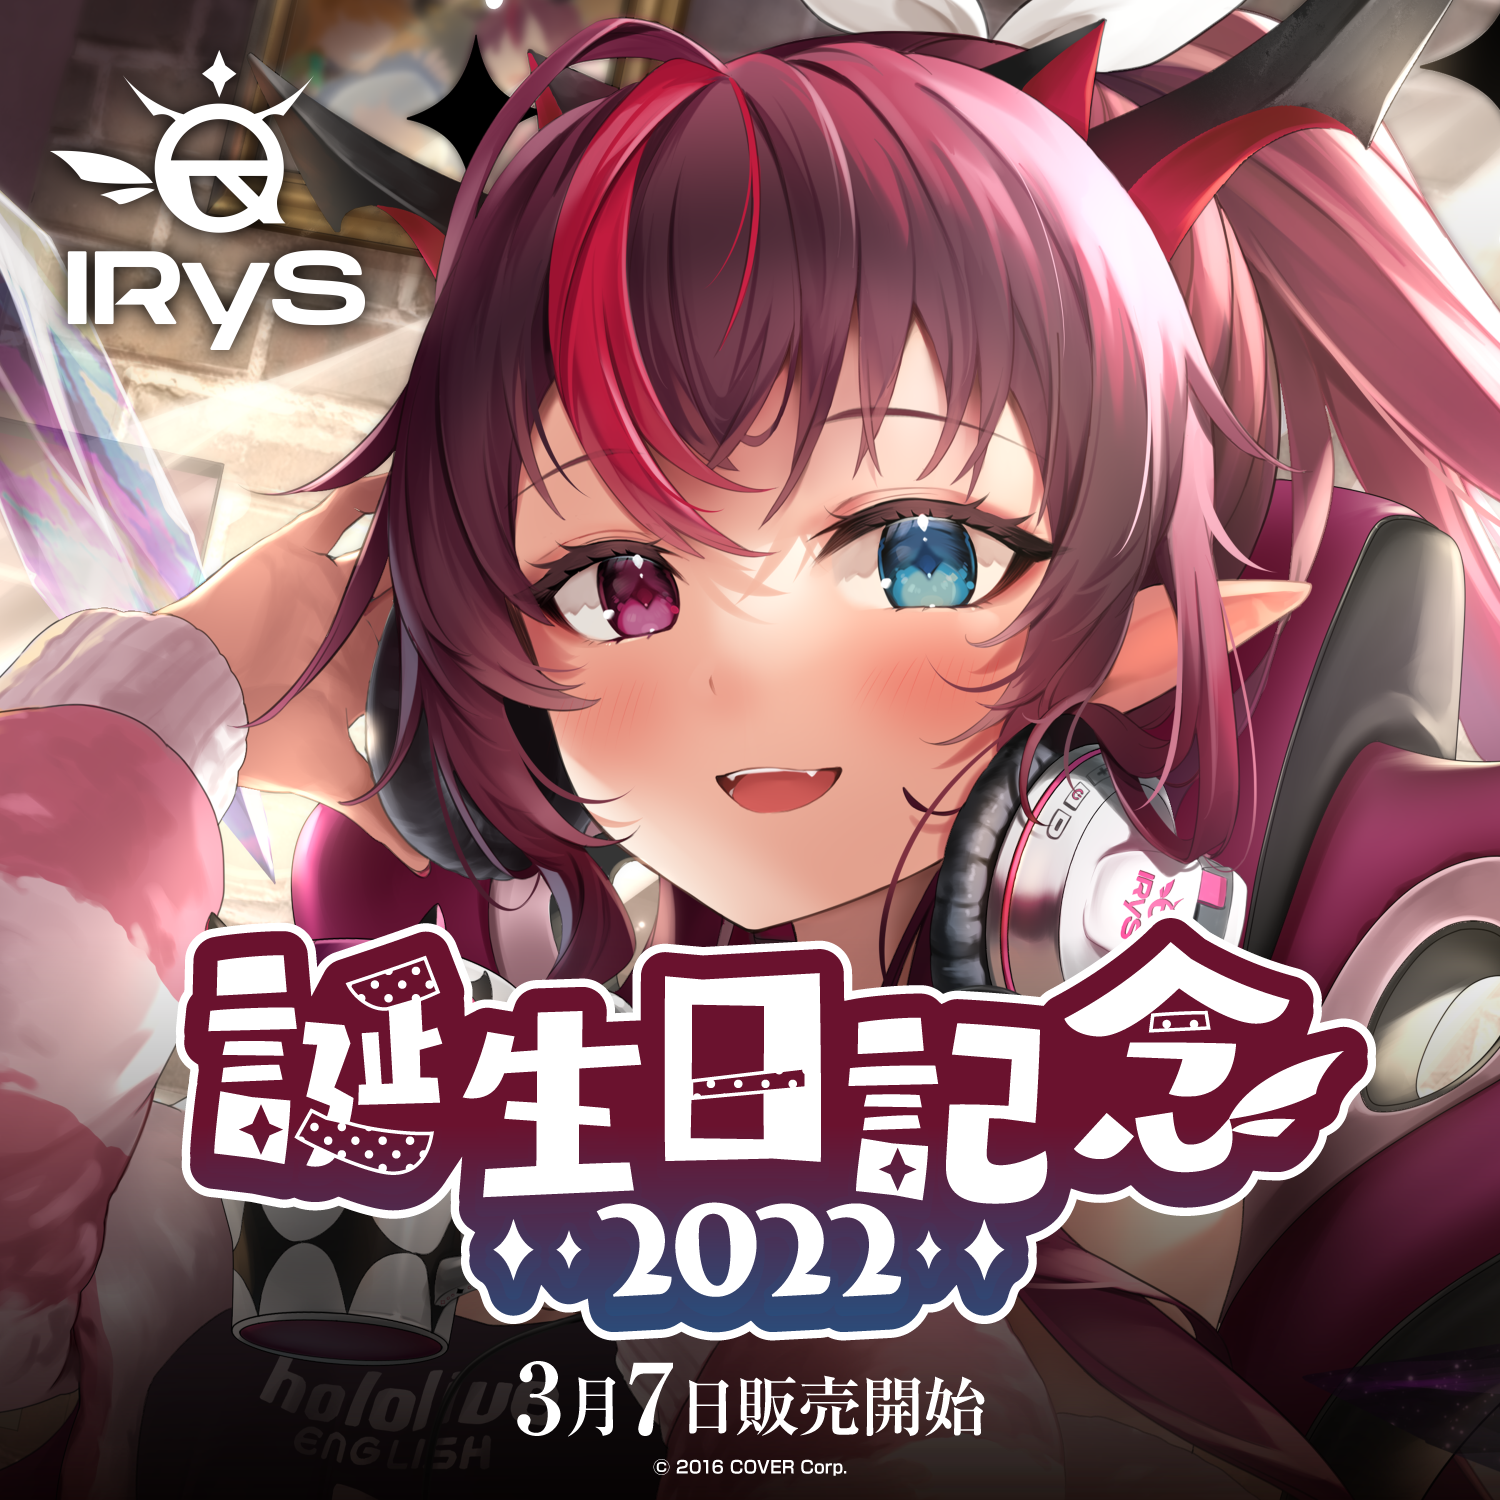 hololive meet Taipei アイリス Irys グッズ セット - キャラクターグッズ